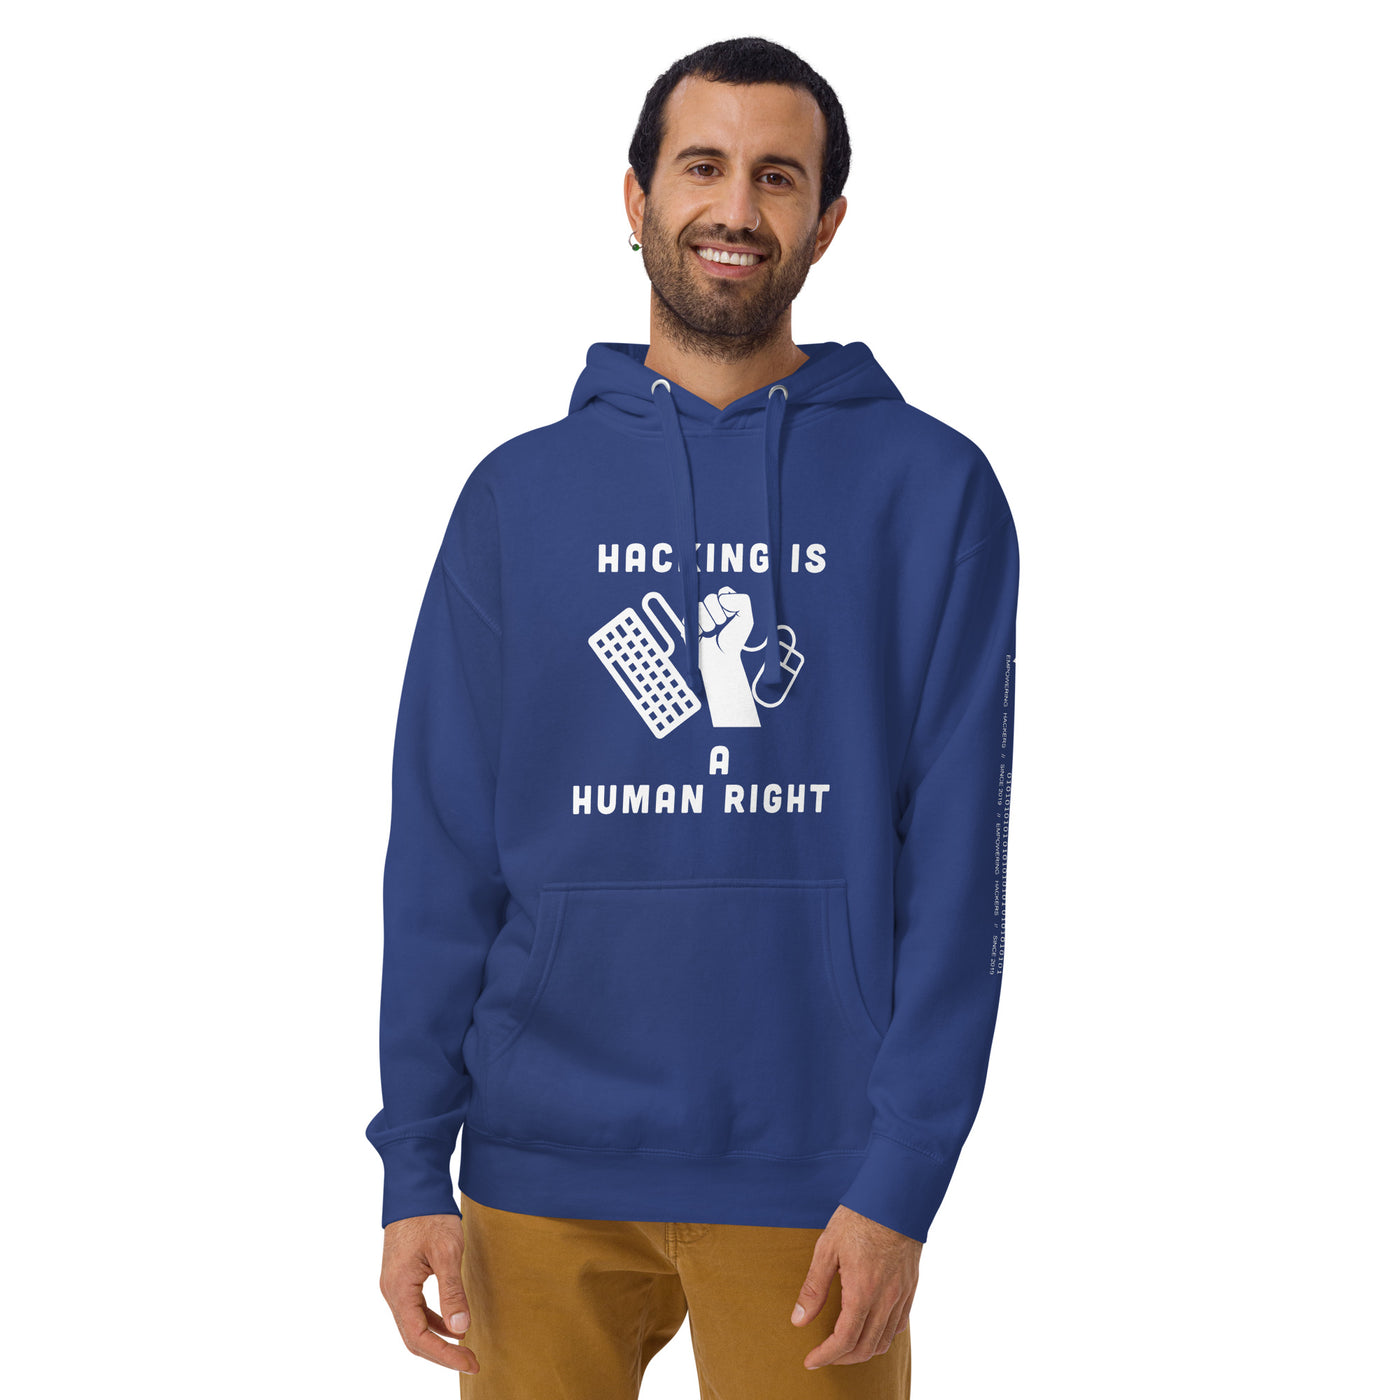 Hacking is a human right - Unisex Hoodie